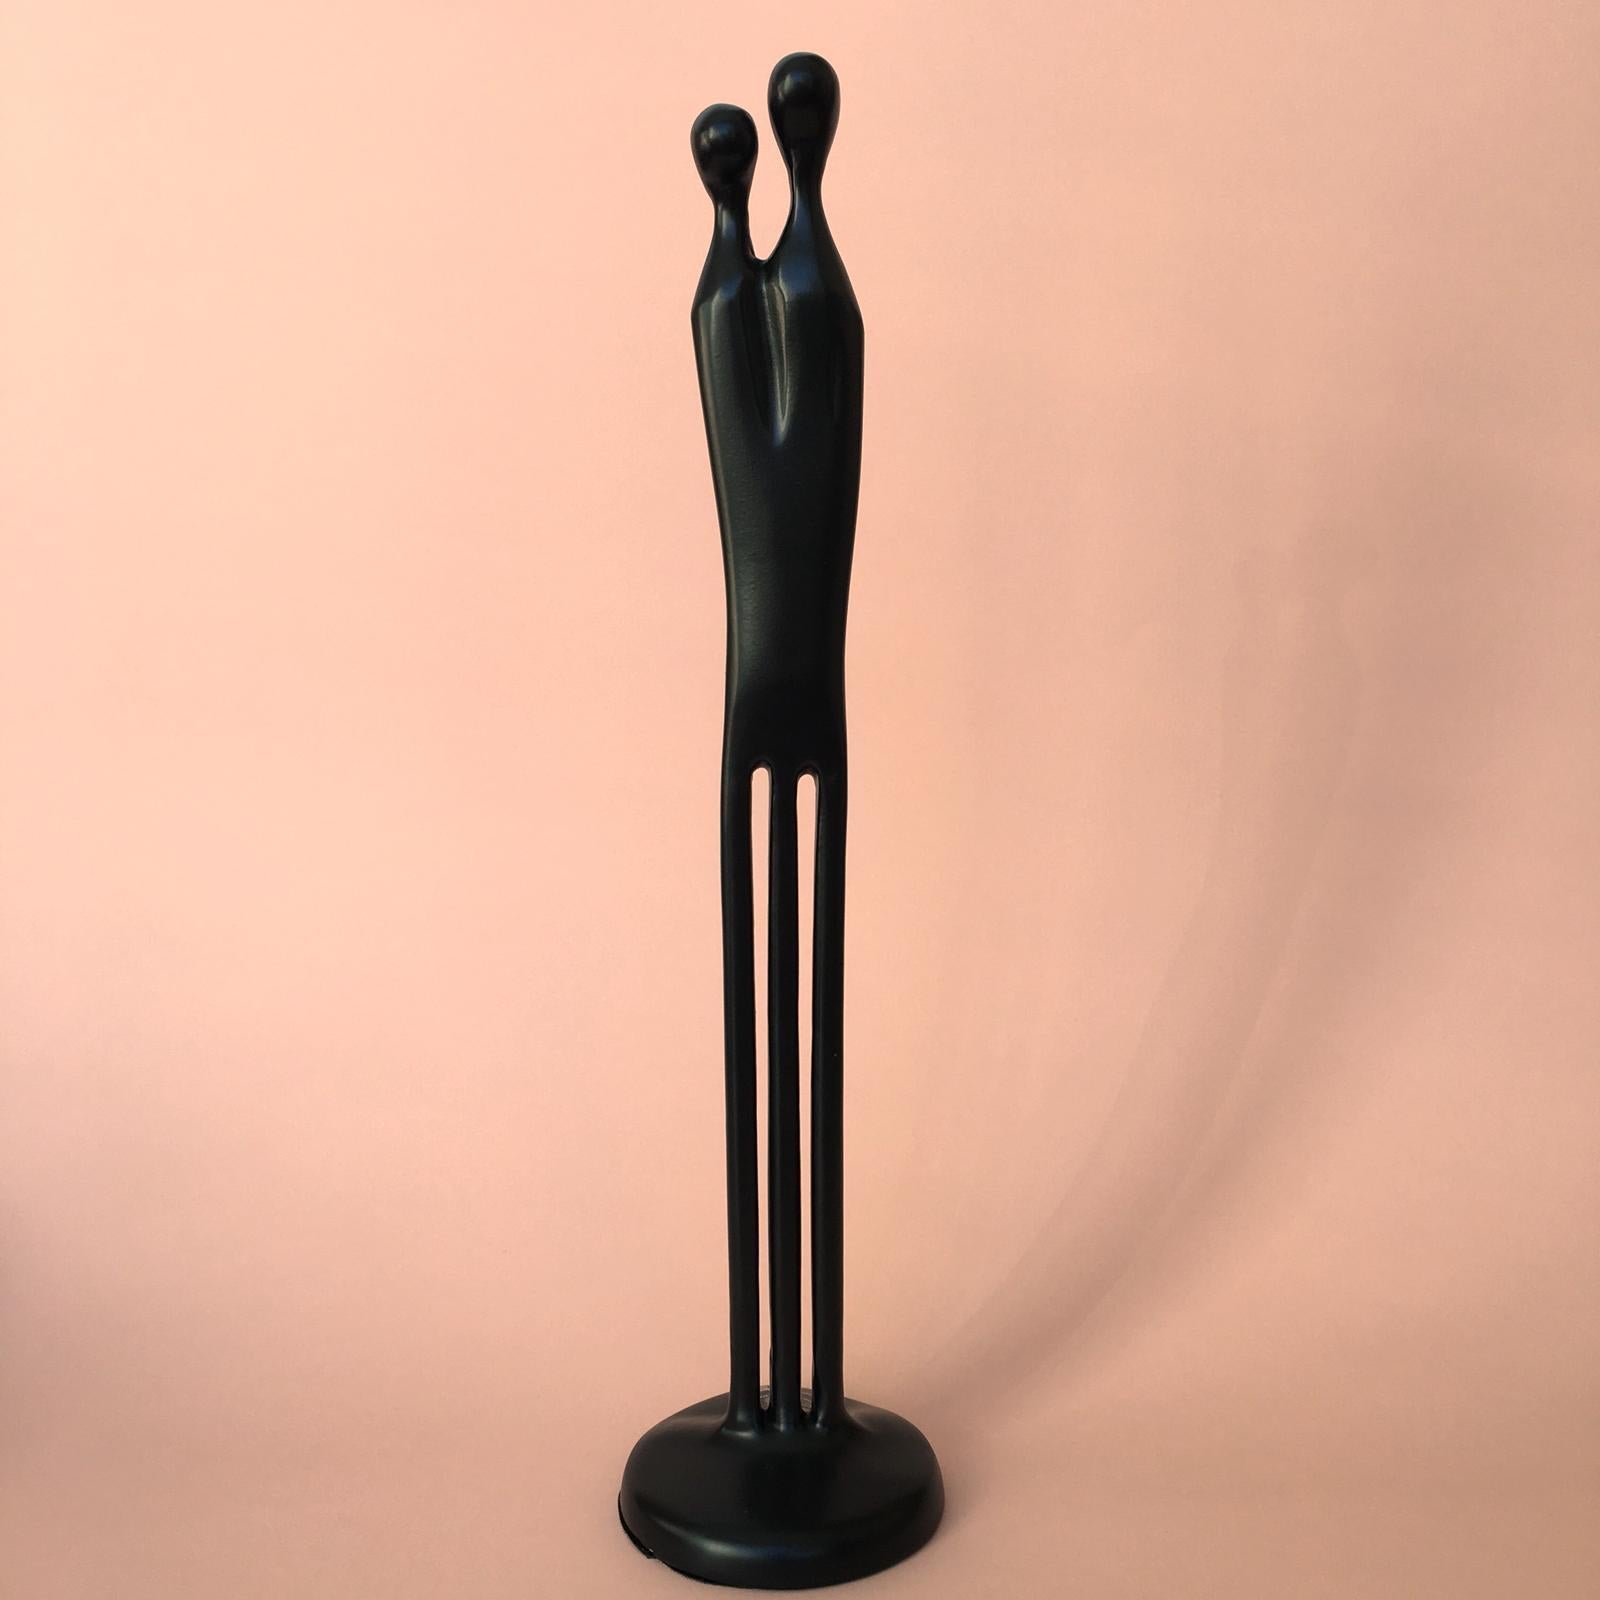 This is a heavy and stable black colored bronze statue with original label.

The Swedish designer Louise Hederström lives and works in Malmo, Sweden. She has studied at Beckman’s in Stockholm and at the University of Lund.